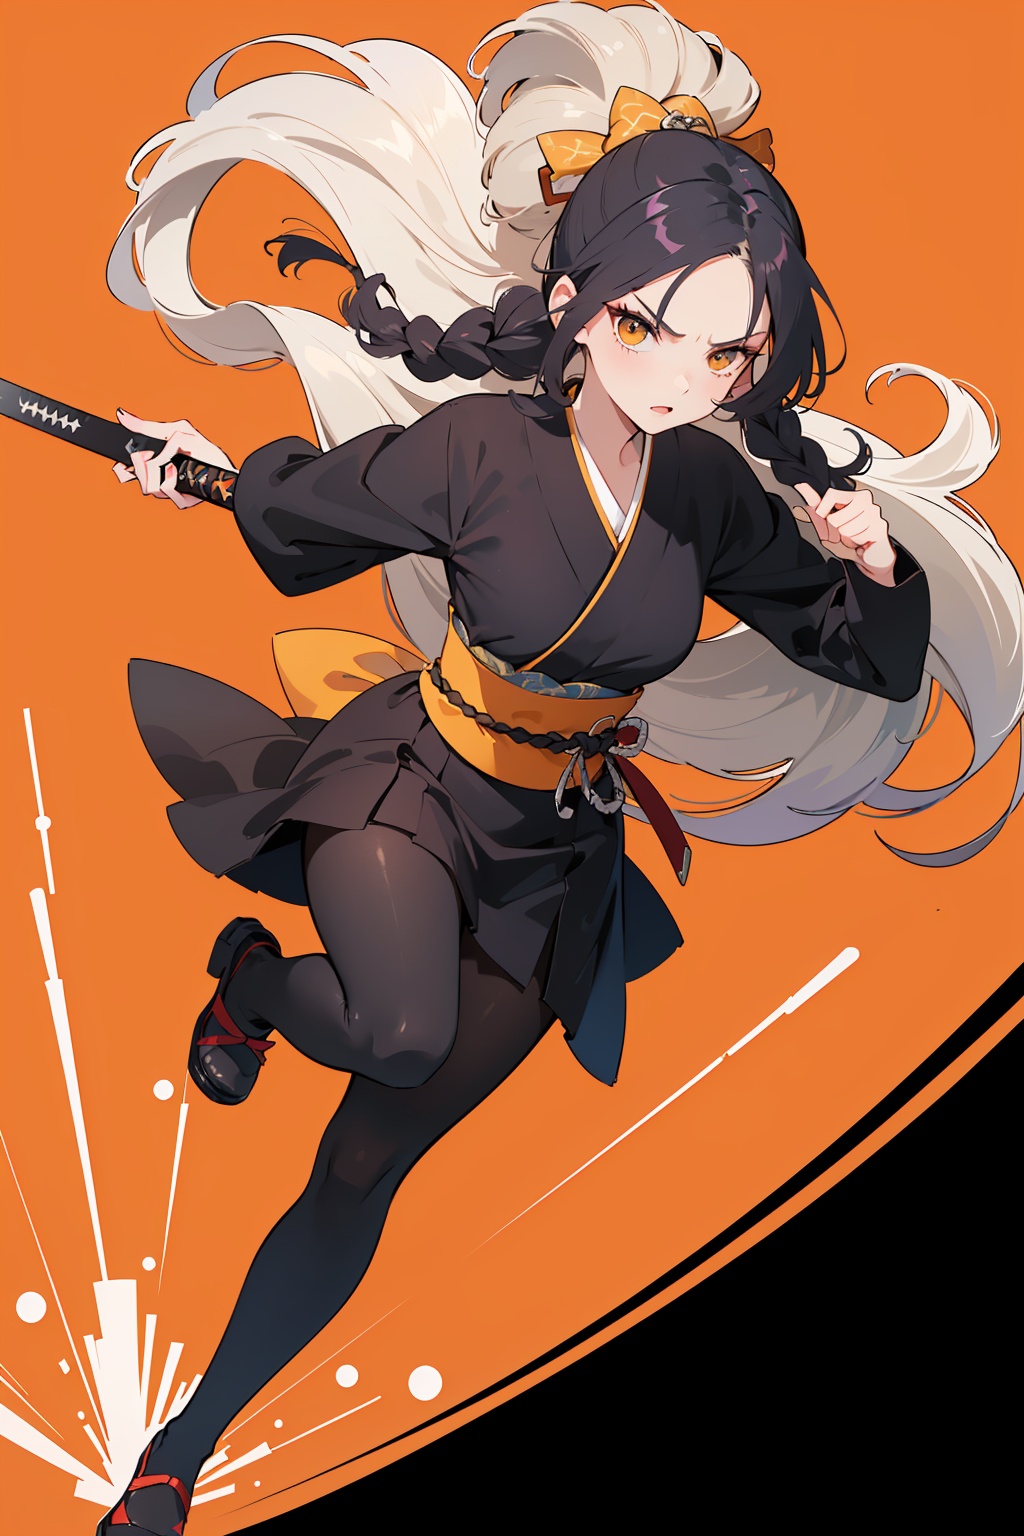 ((perspective lens, a woman with long hair,  dynamic pose of Serious and mean expression, two hands brandishing a big long samurai sword )) ((Pure orange background:1.2)),appears in her early twenties,captured mid-motion,with her long braided hair flowing. Her outfit is reminiscent of a bee,with a color palette of black and yellow,and she is tossing money casually,indicating a playful.,